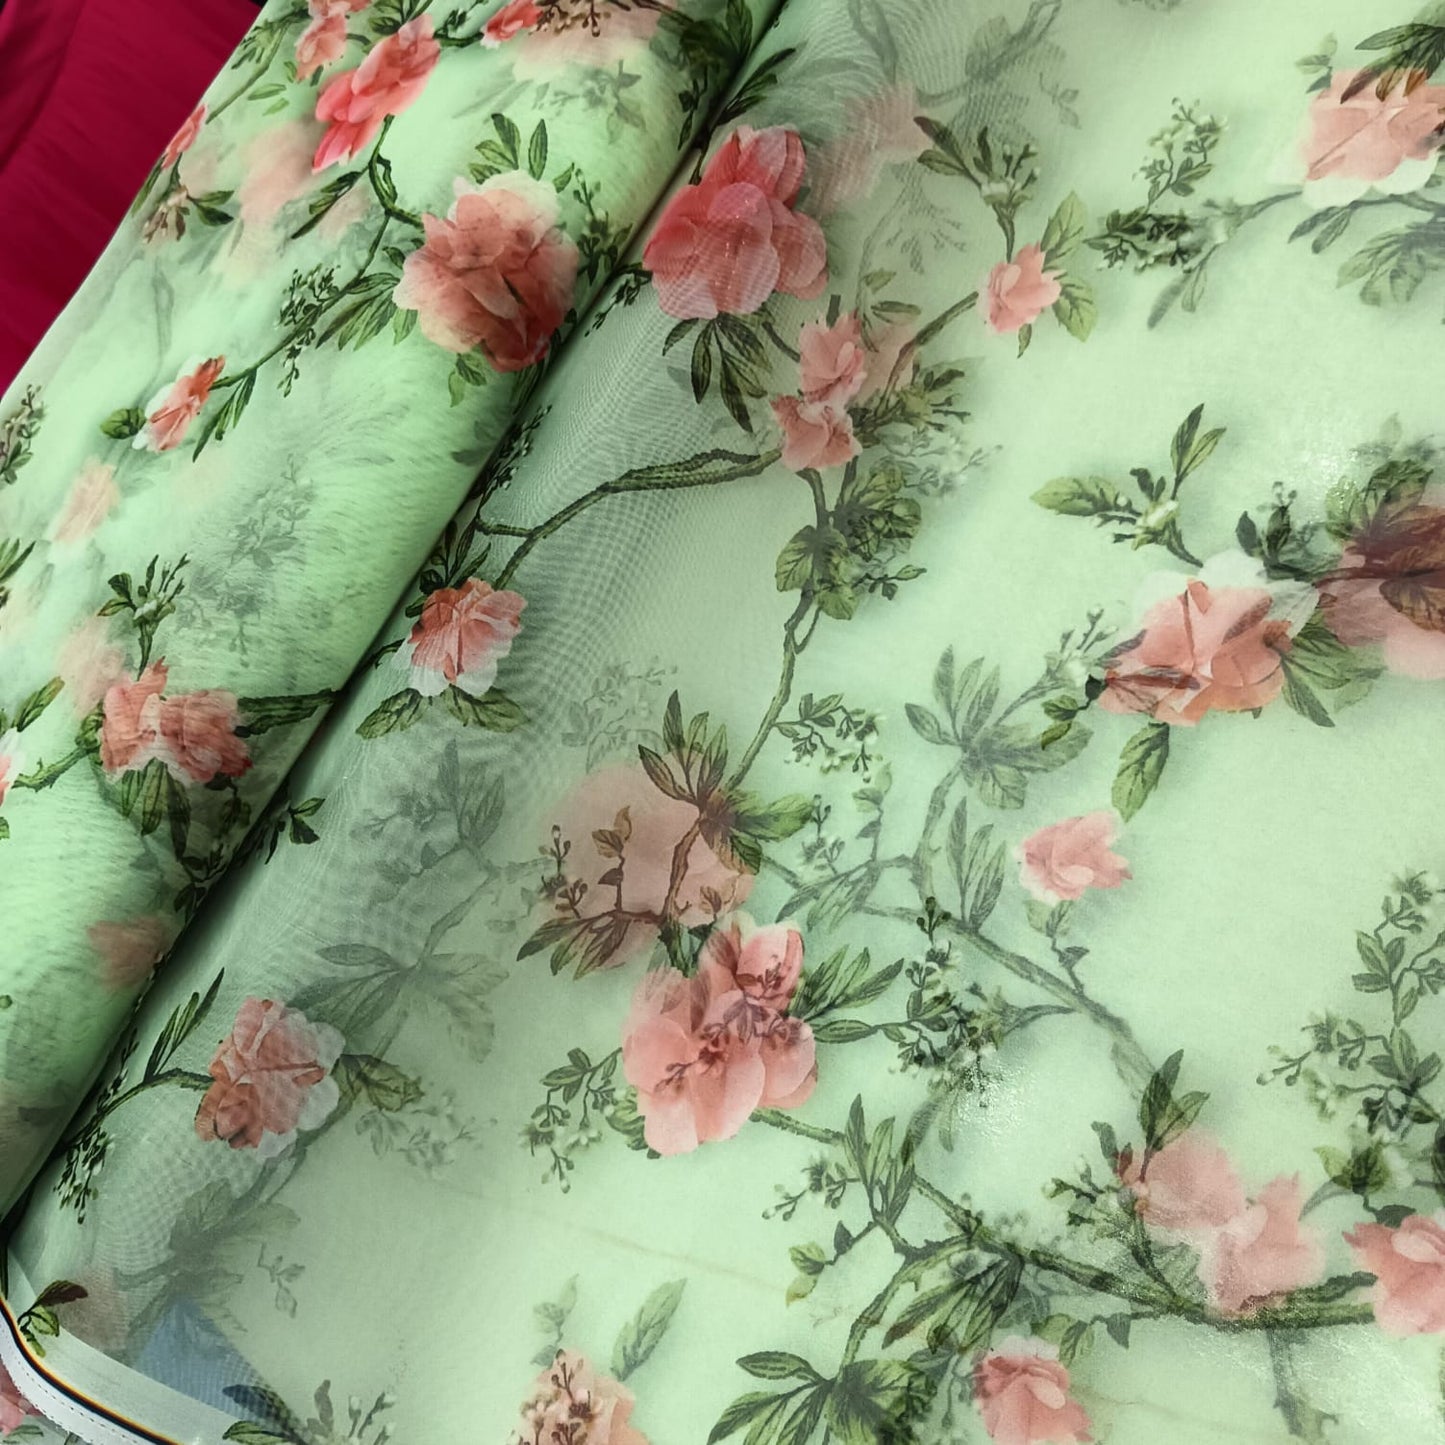 Floral Print on Organza in Green Colour Fabric